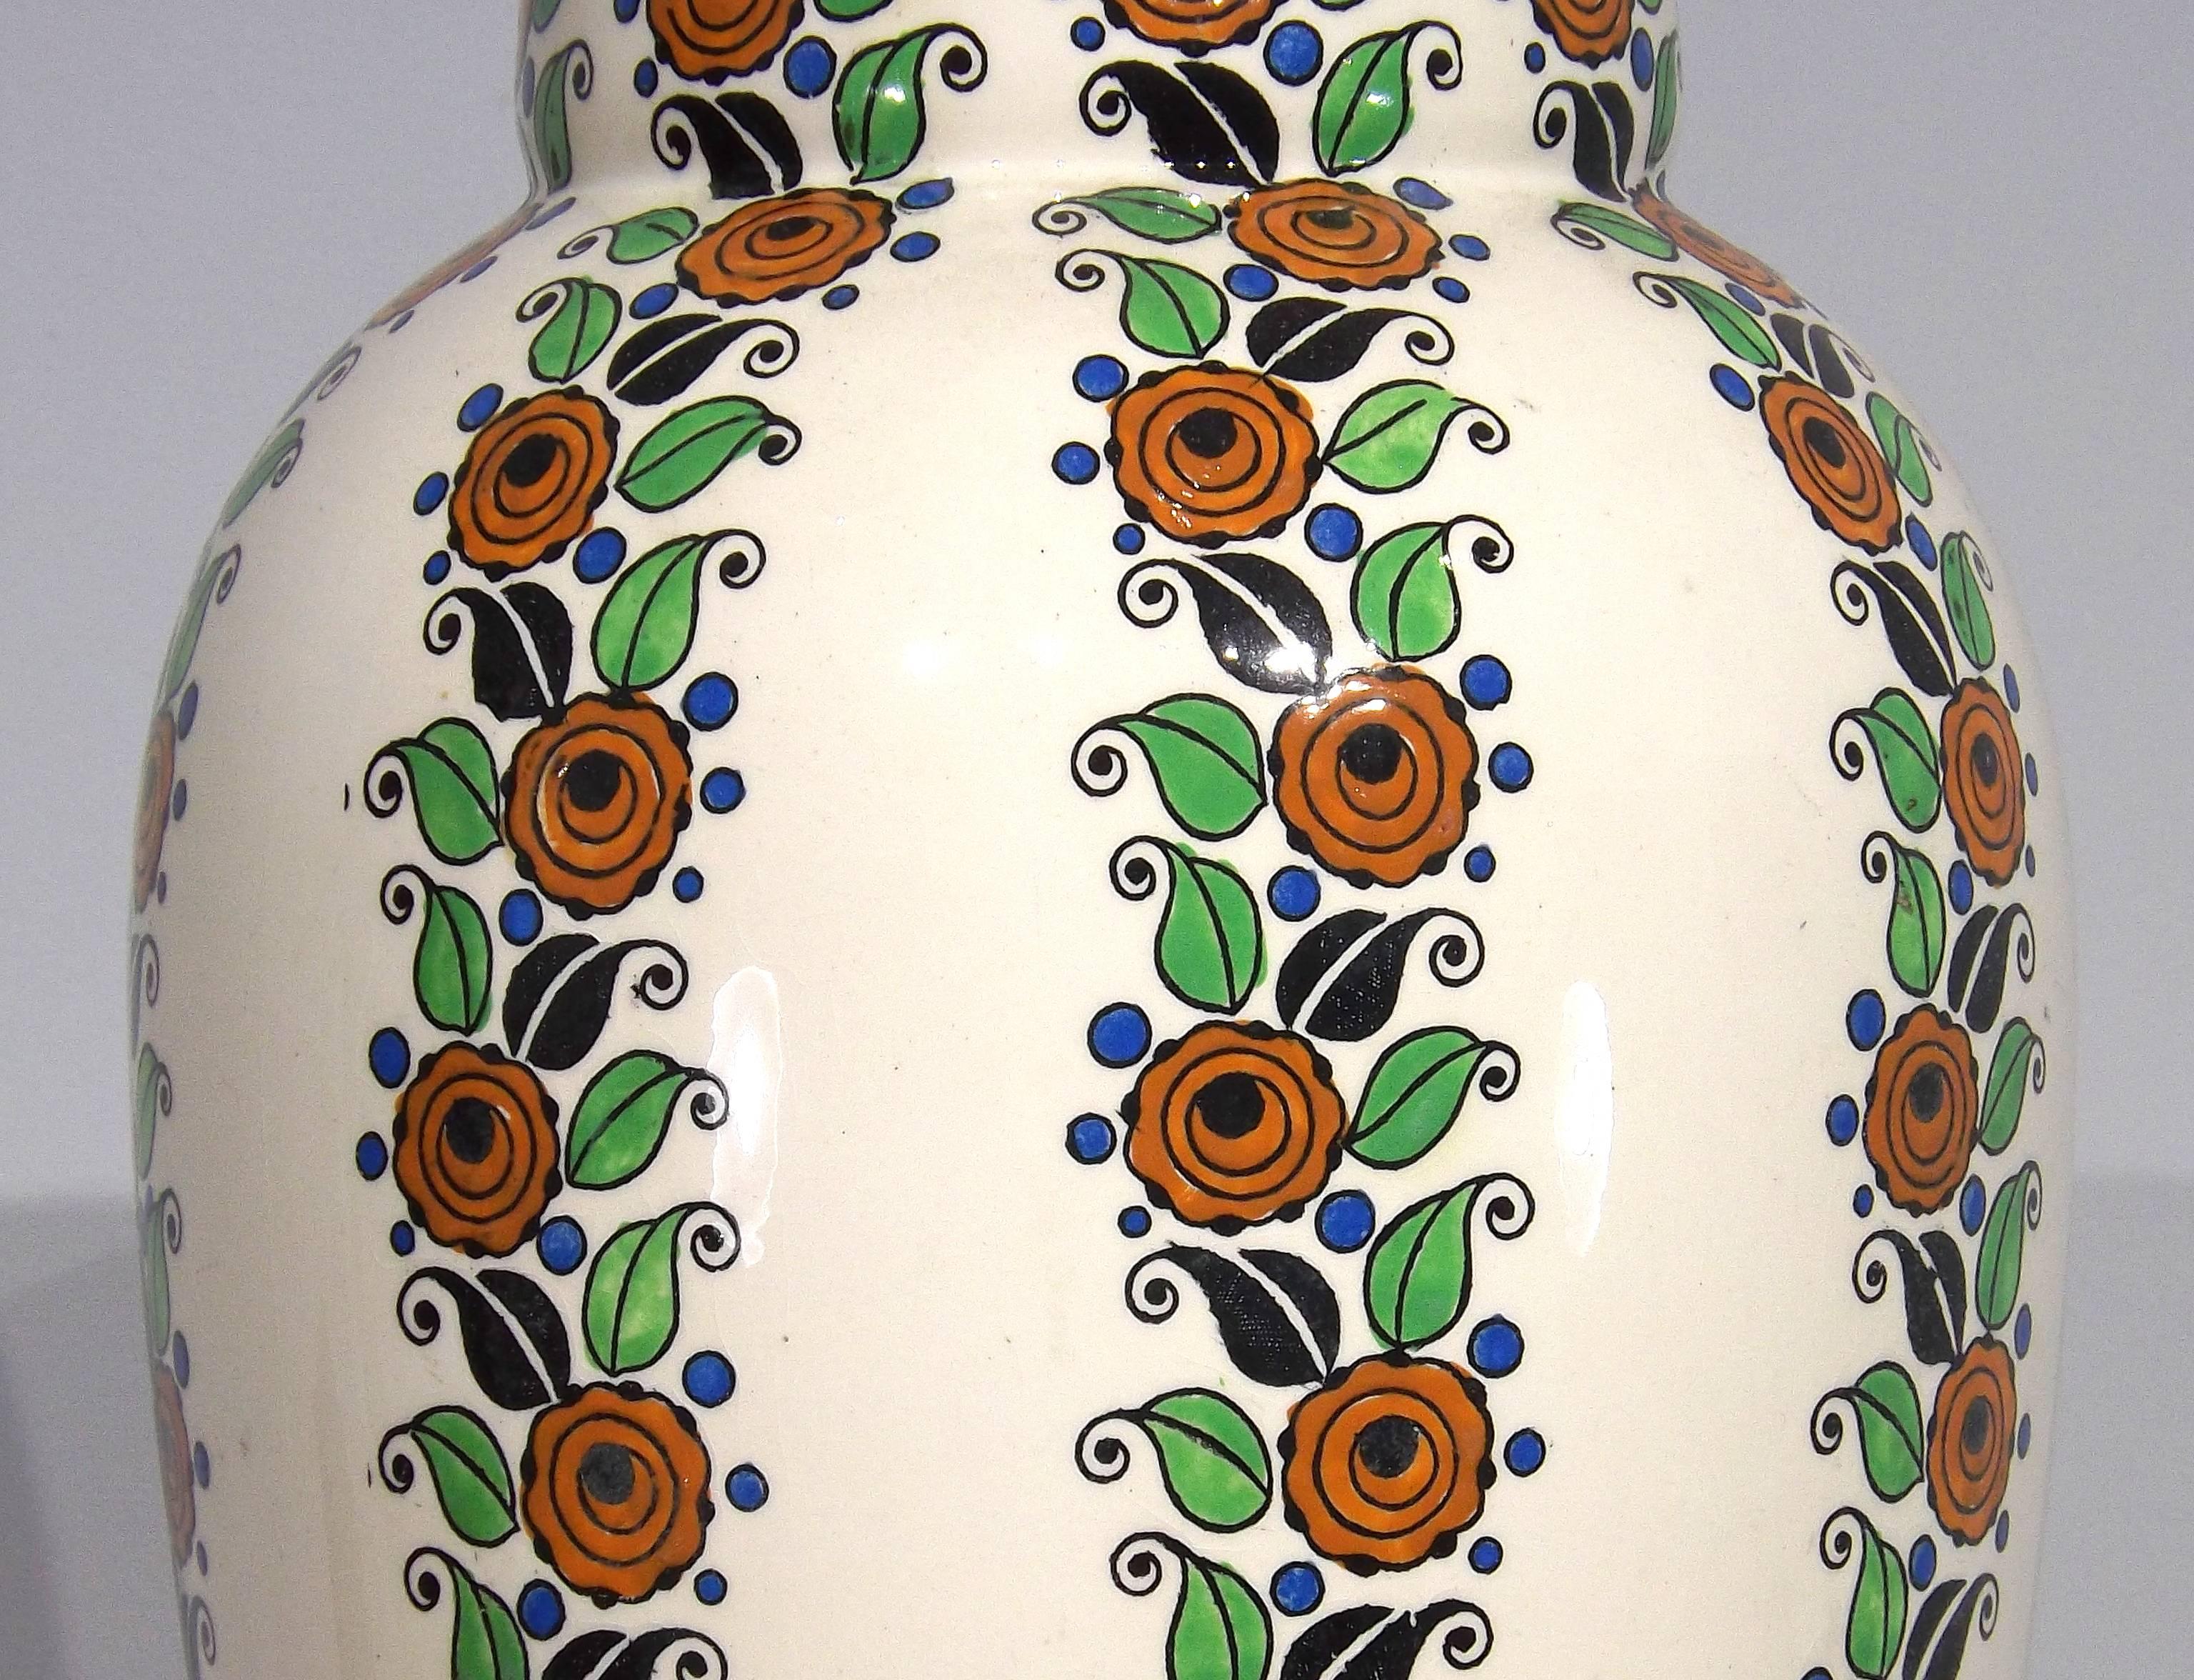 A tall vase covered with ascending rows of flowers made by the famous Boch Freres pottery from Belgium. Stamped on bottom with their company logo.